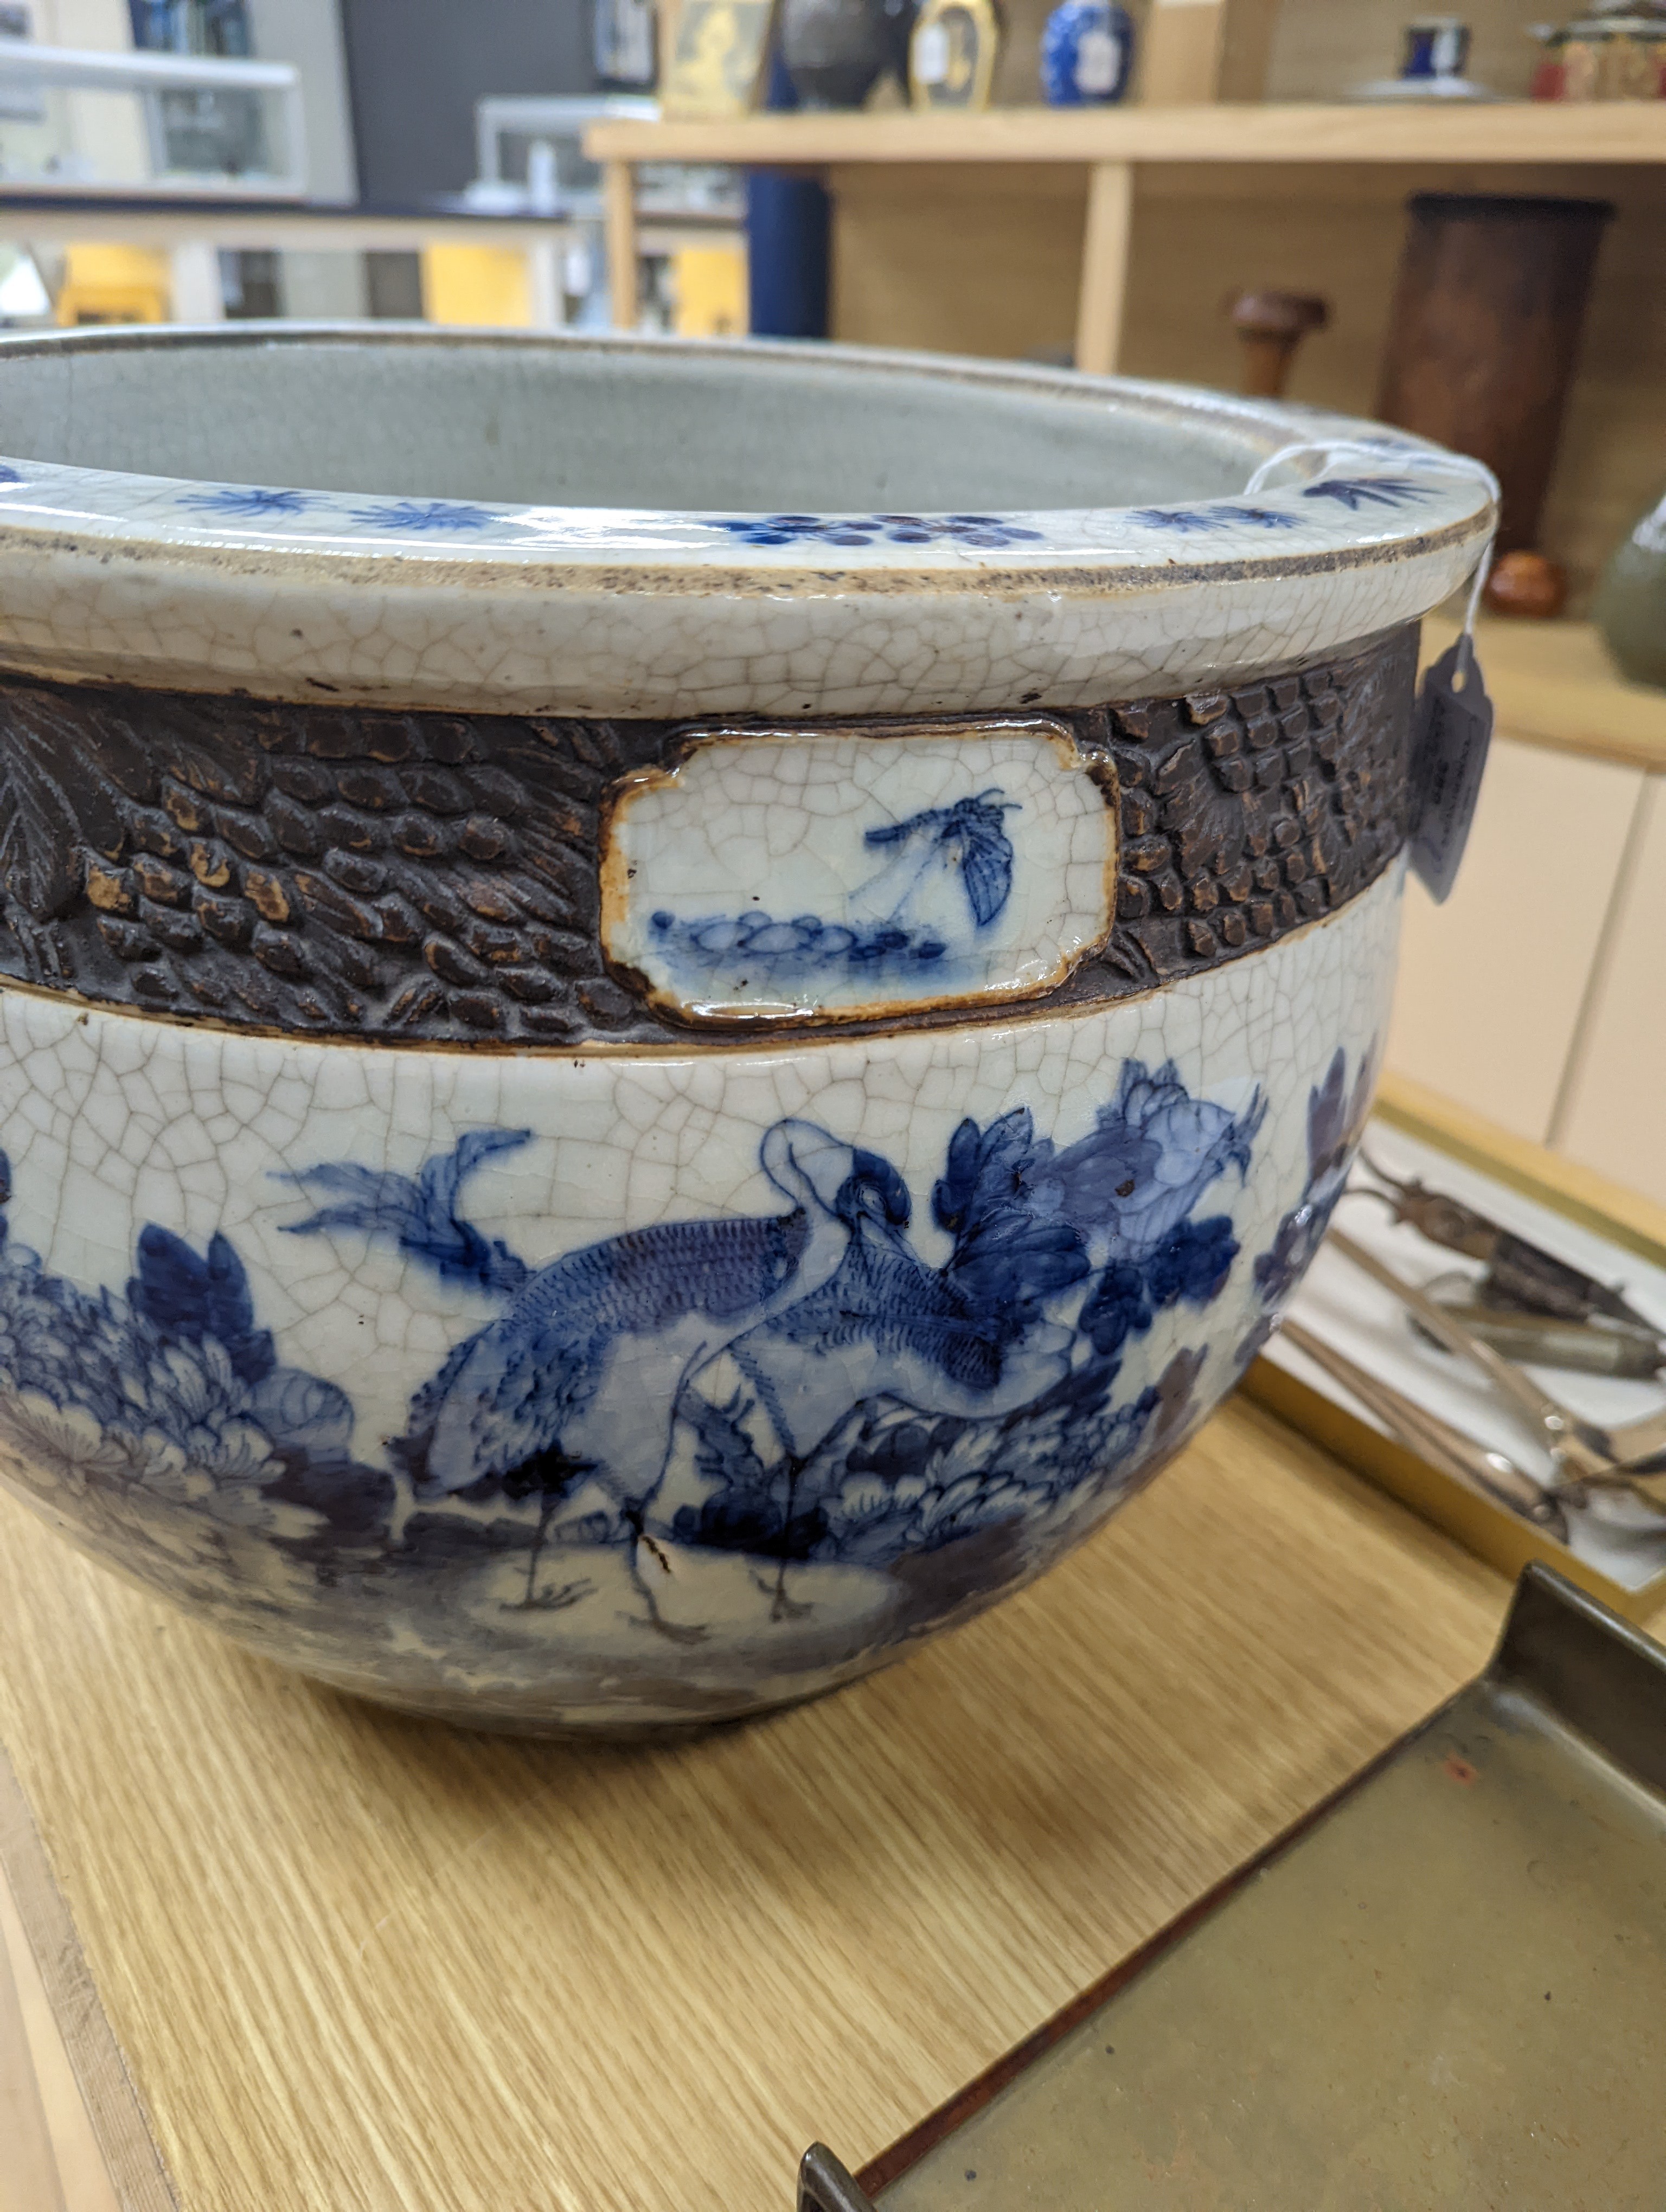 A late 19th/early 20th century Chinese blue and white crackleglaze jardiniere 30cm